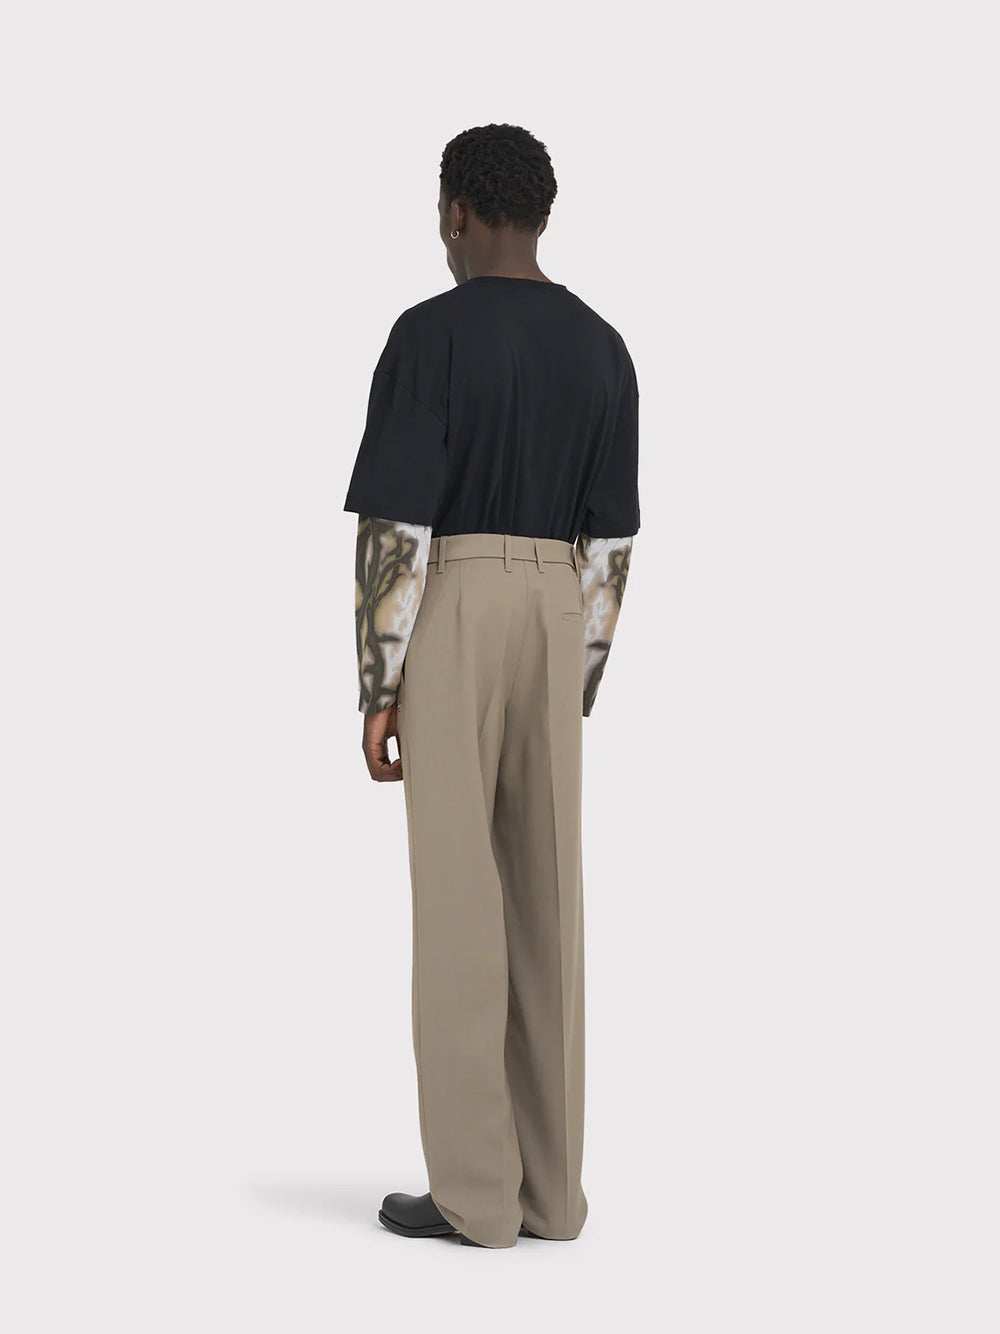 Cooper suiting sand trousers